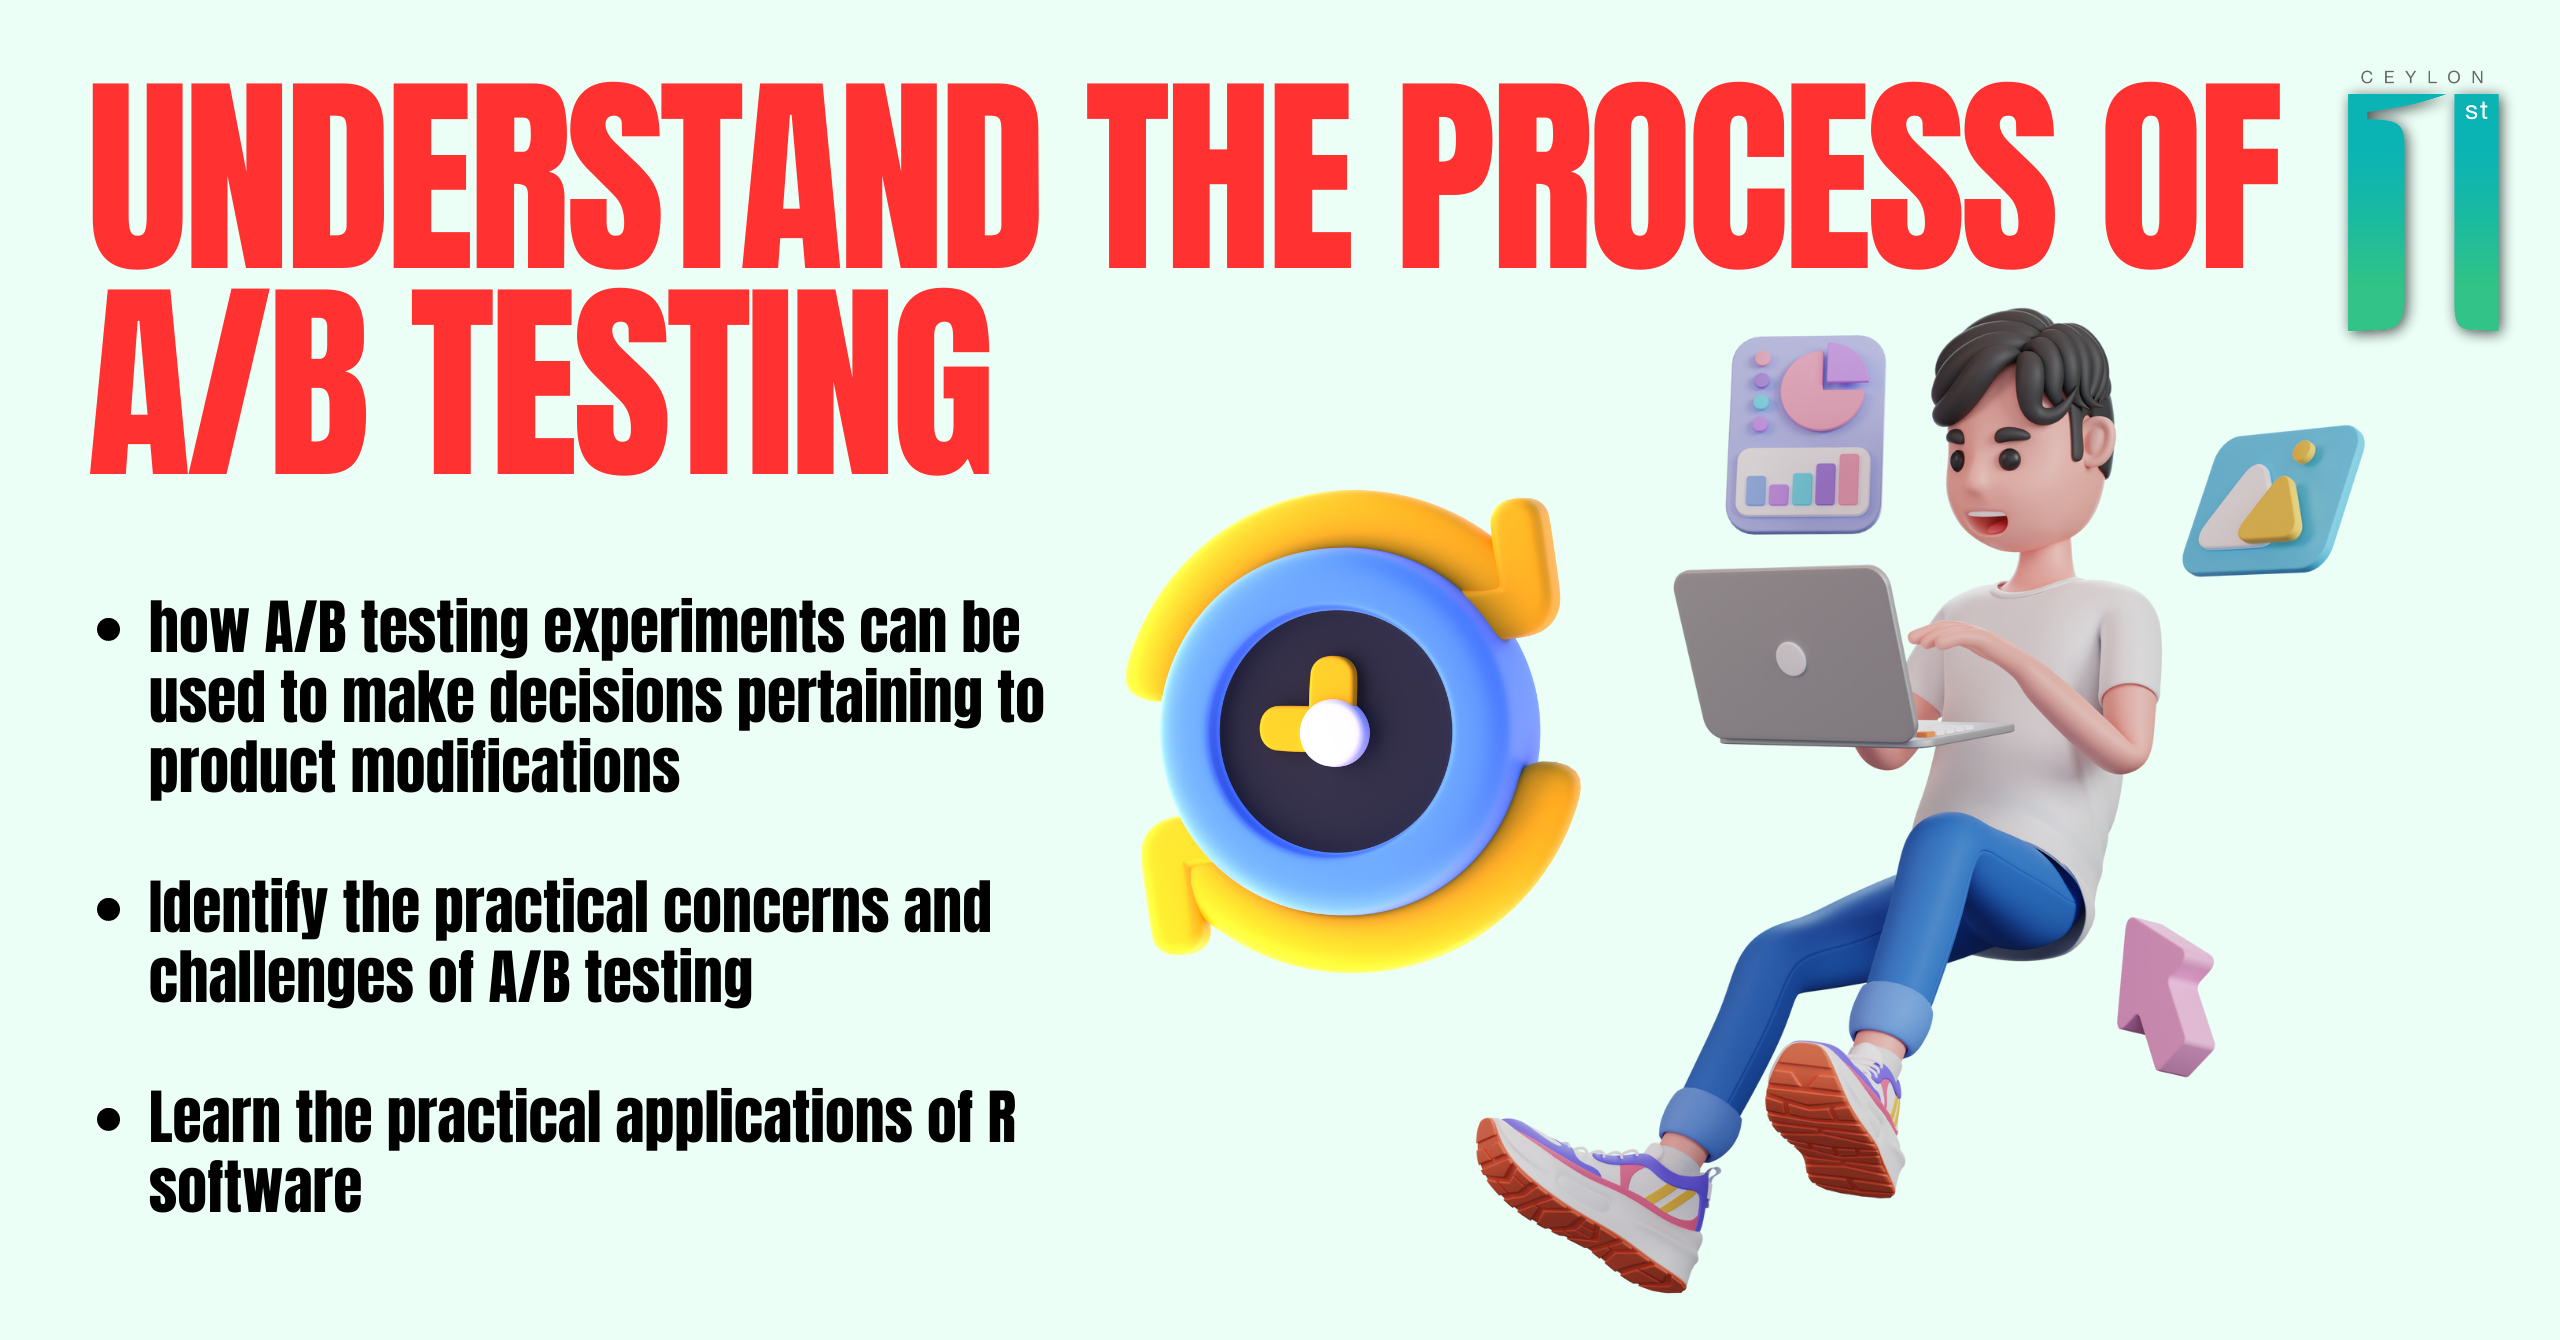 Understand the process of A/B testing